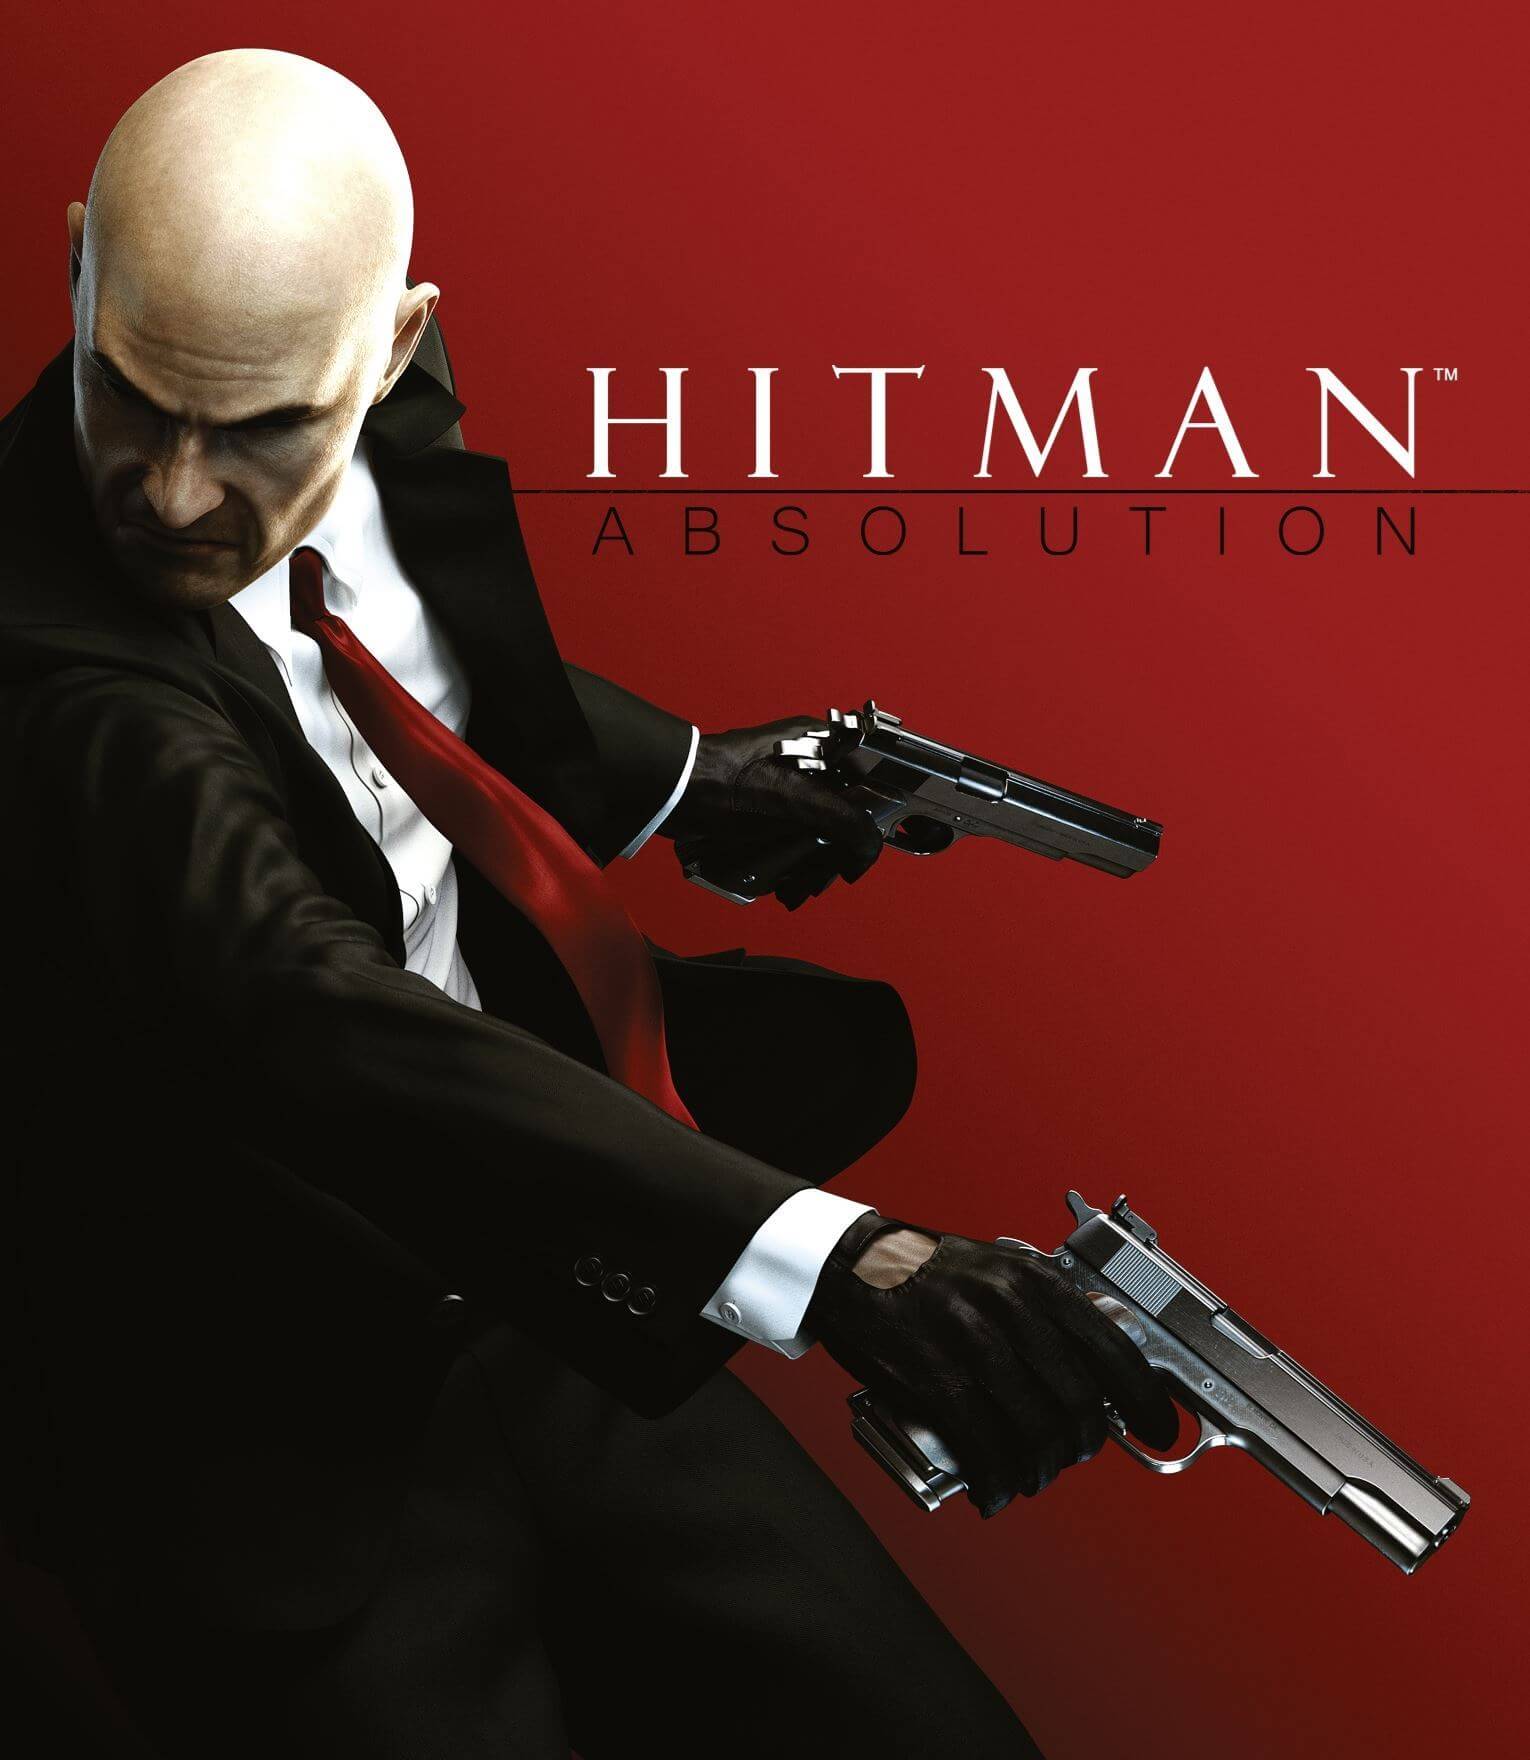 hitman-absolution-buy-steam-key-on-allyouplay-instant-delivery-no-hidden-fees